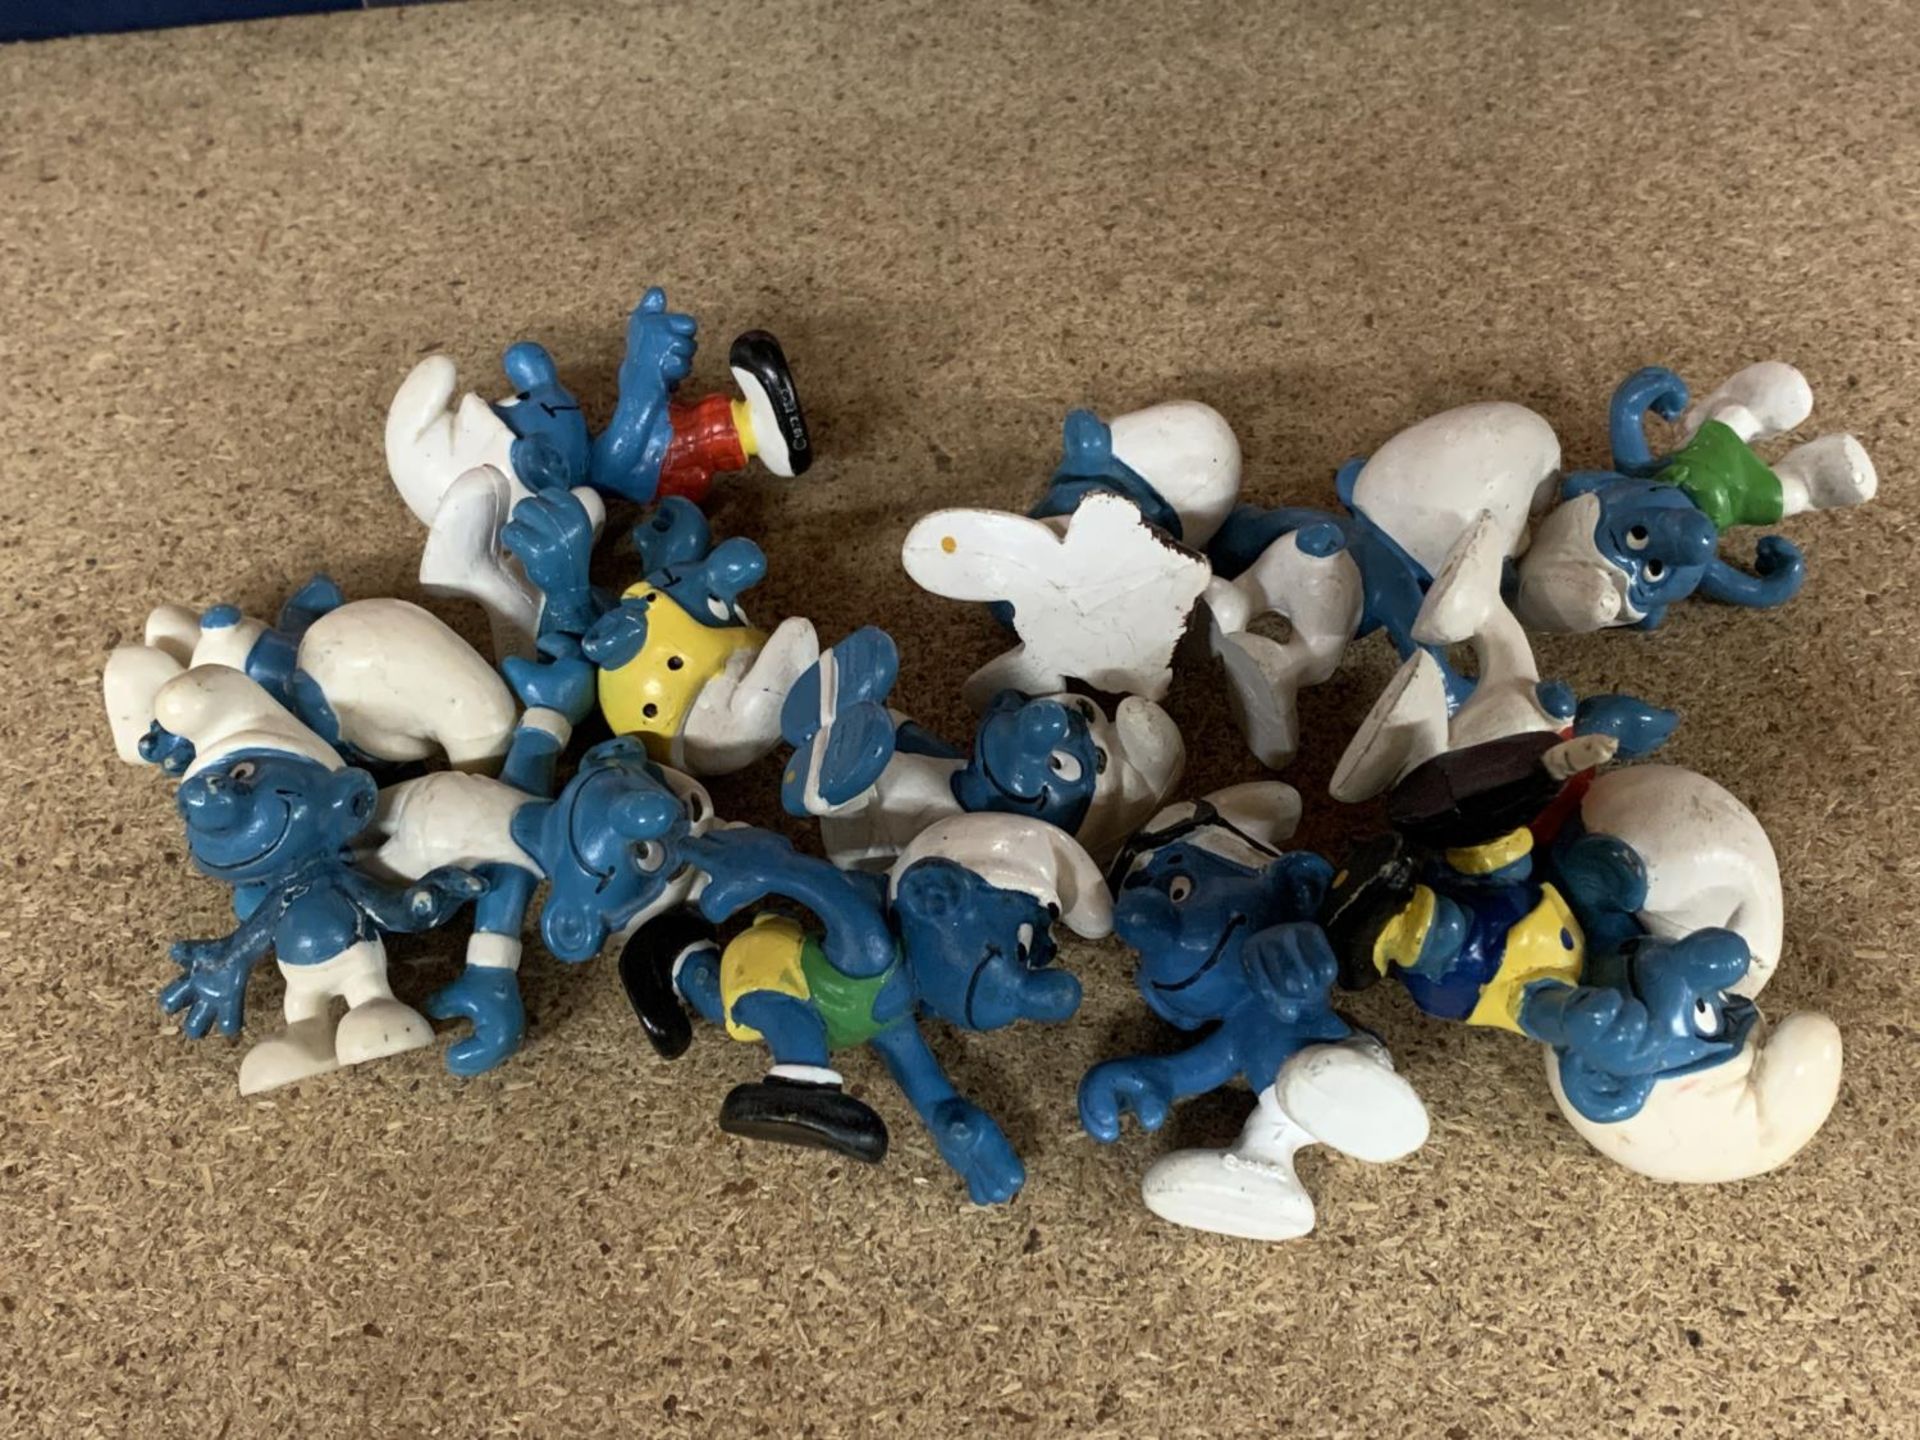 A COLLECTION OF VINTAGE SMURFS